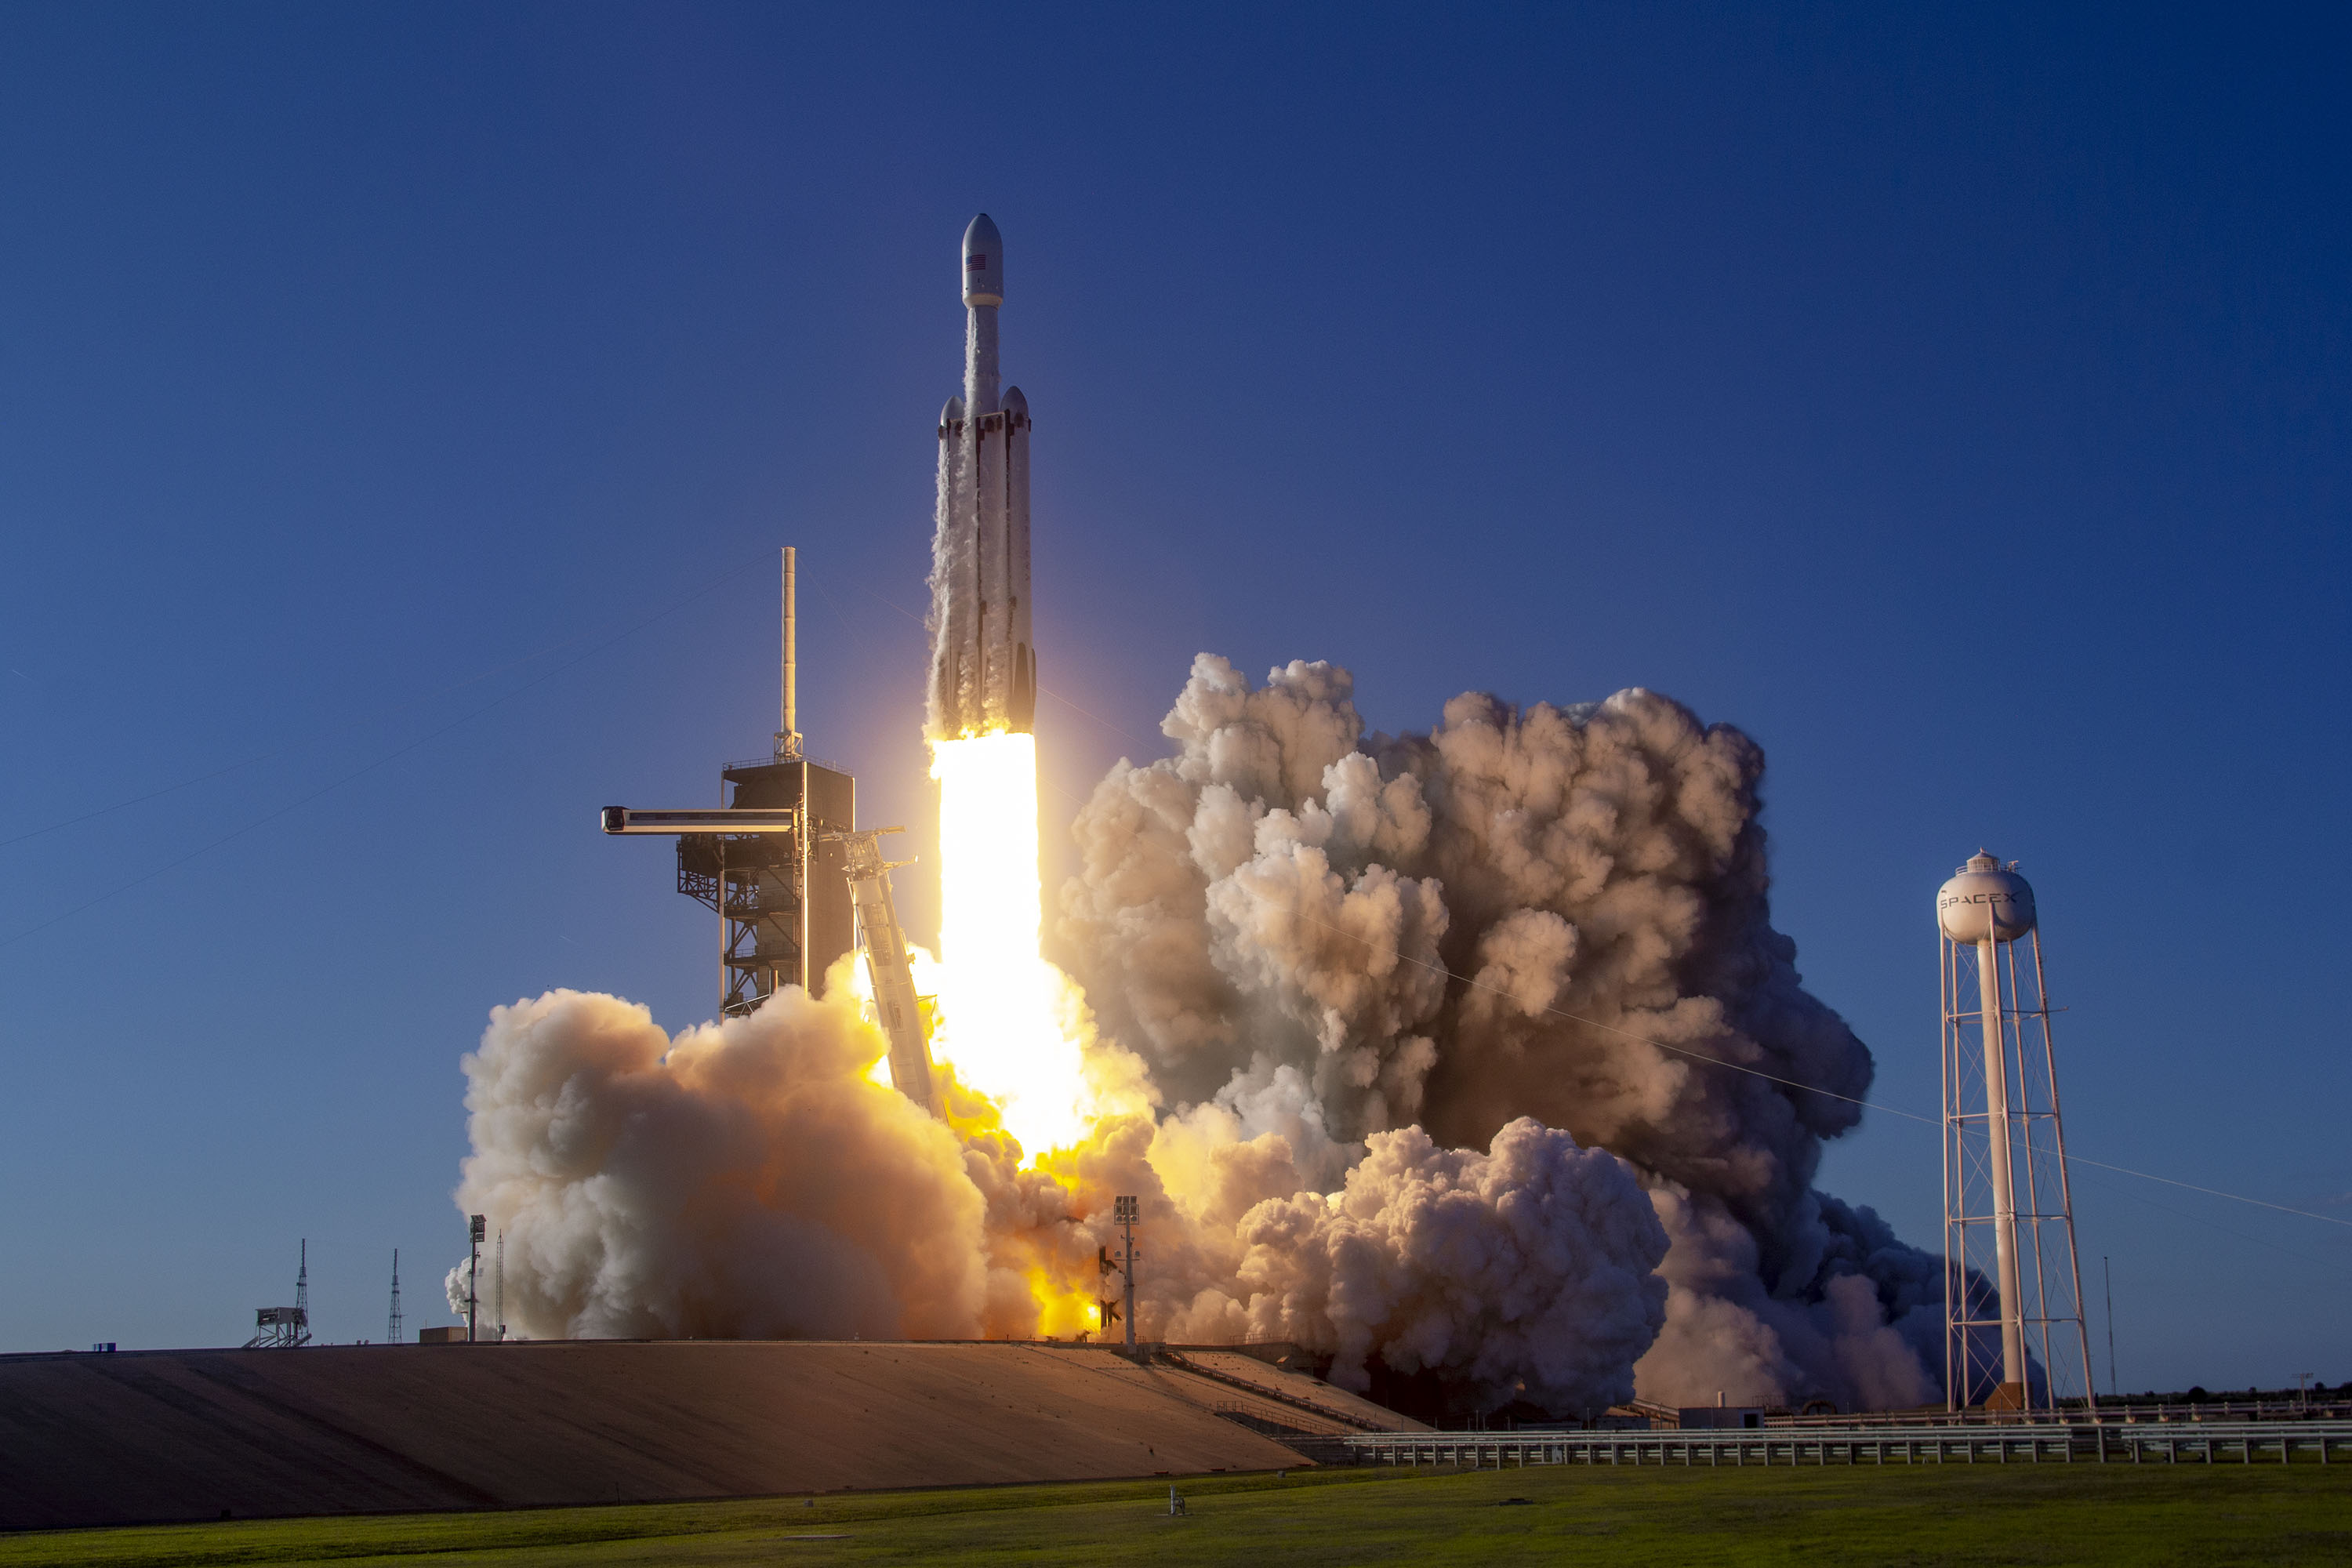 SpaceX completes secret mission USSF-67 for U.S. Space Force - Falcon Heavy puts military satellite into orbit